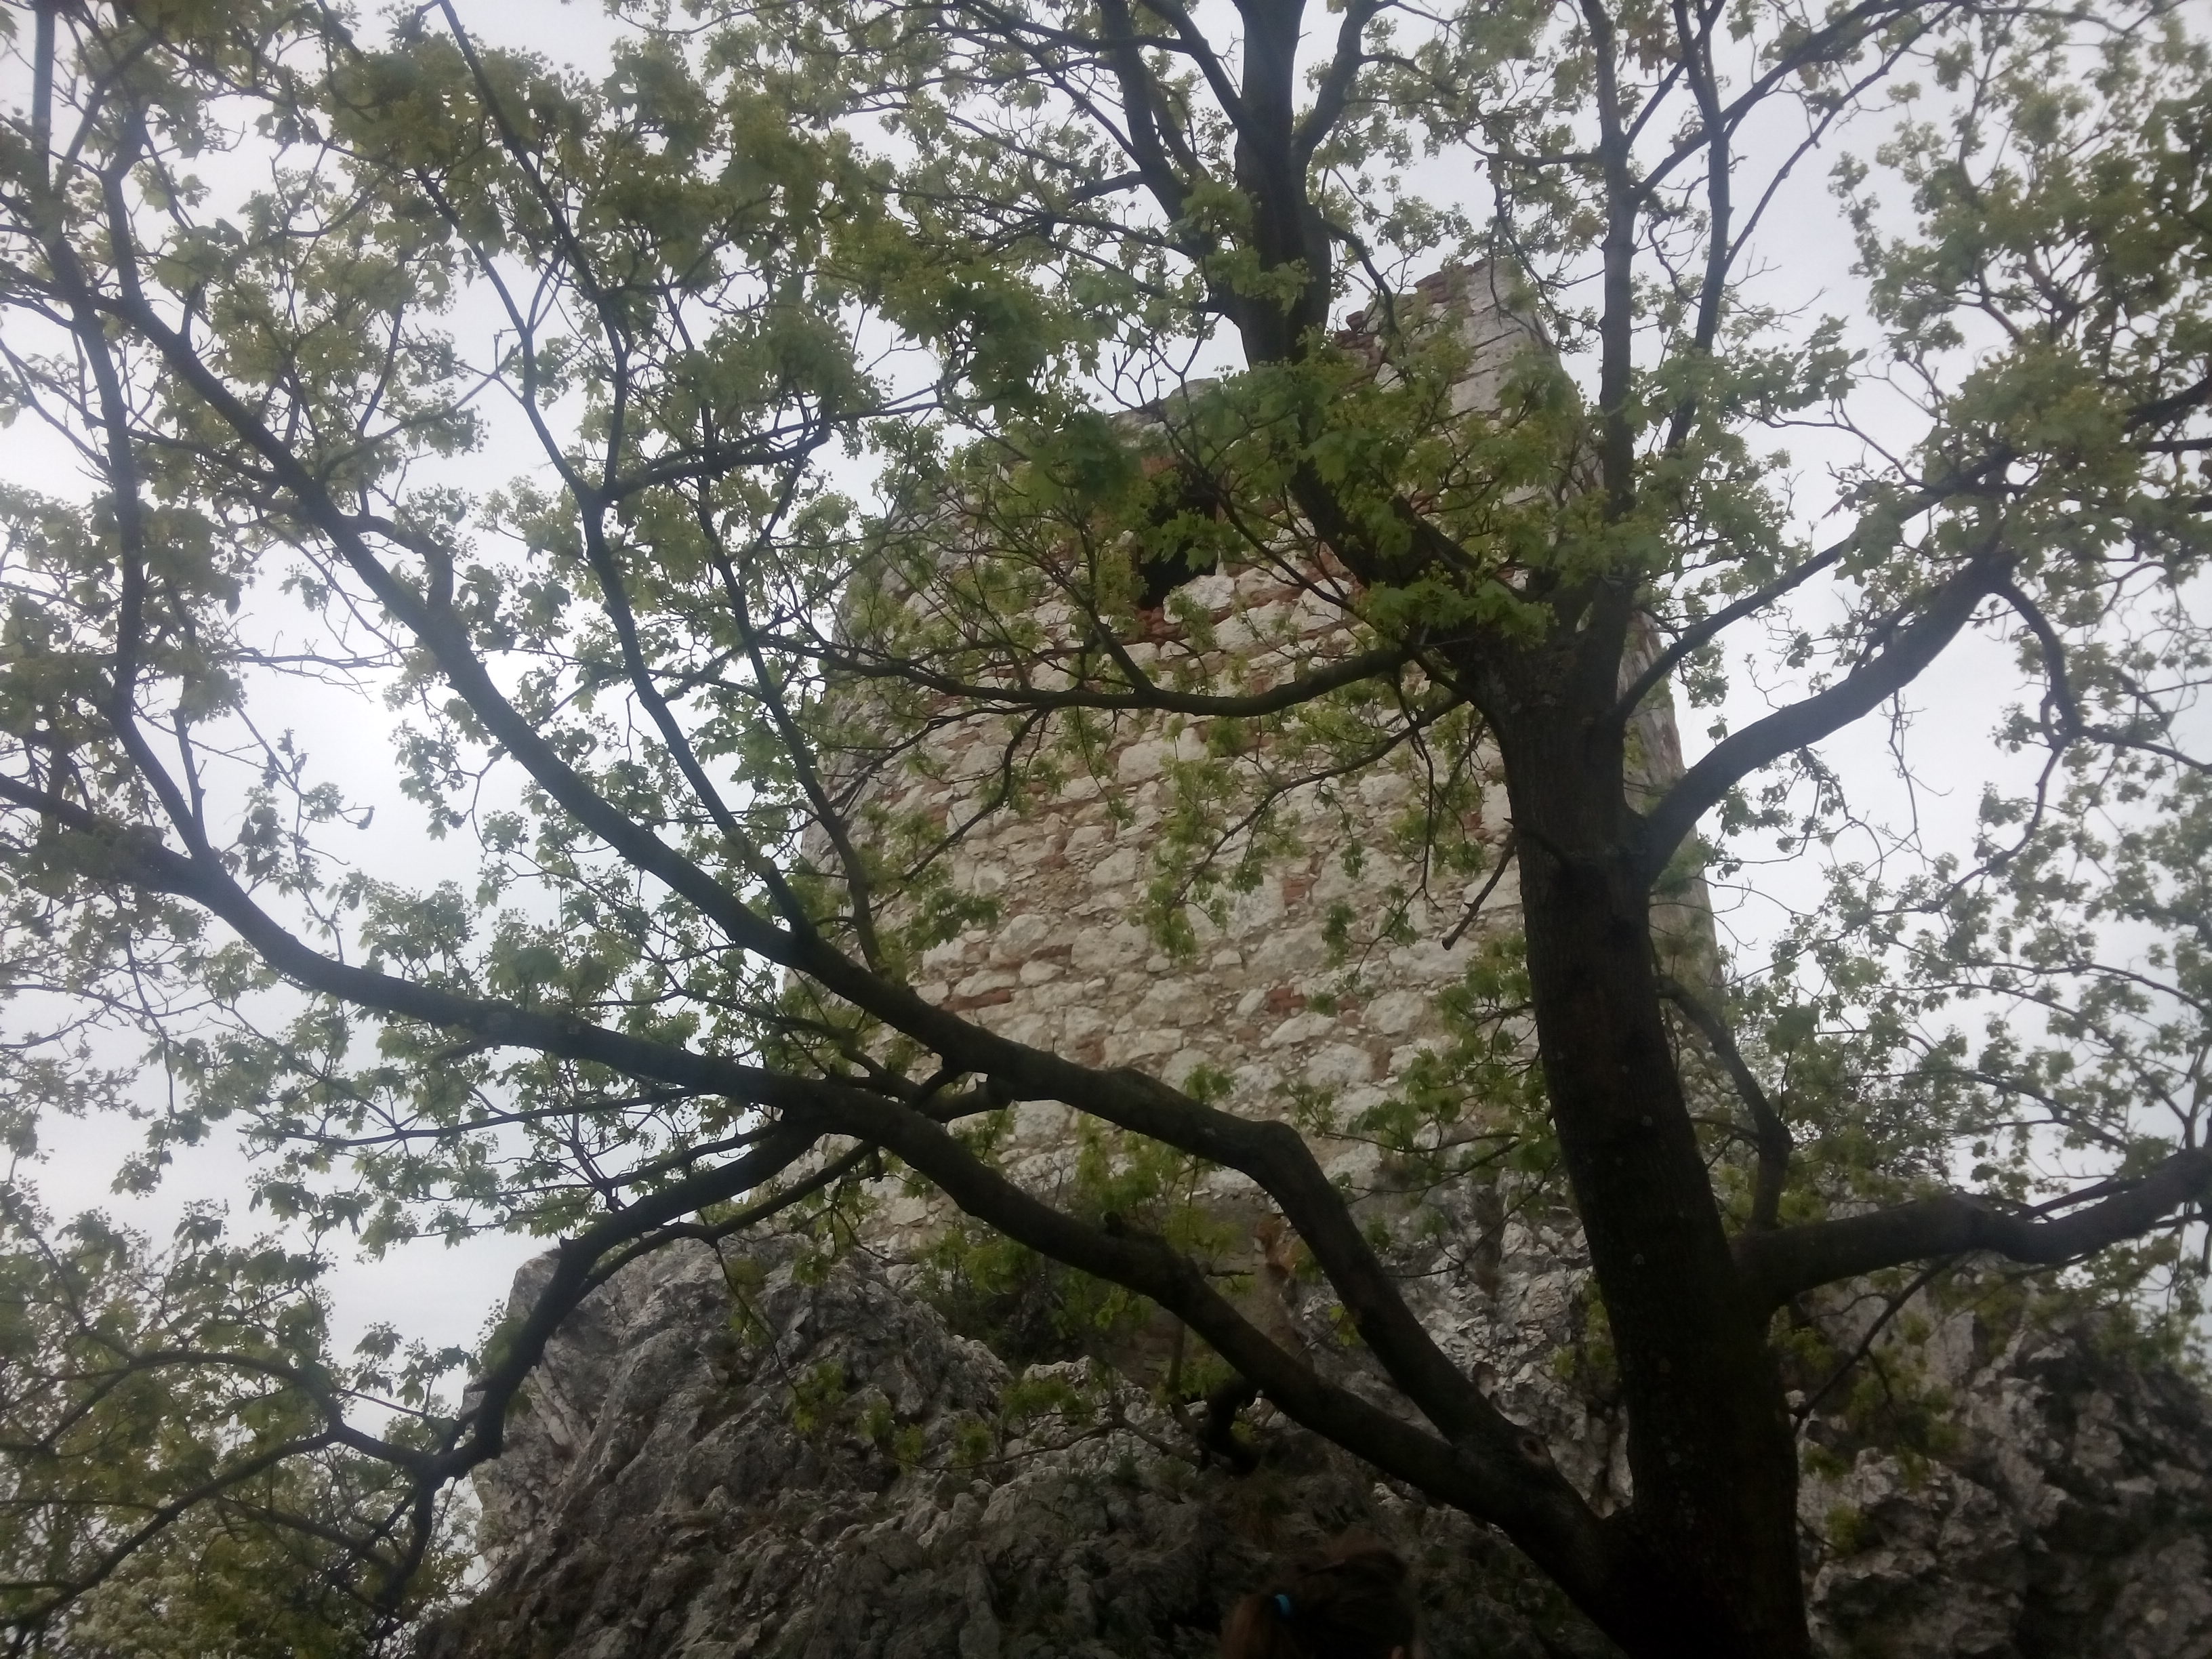 A stone tower behind a slightly leafy tree